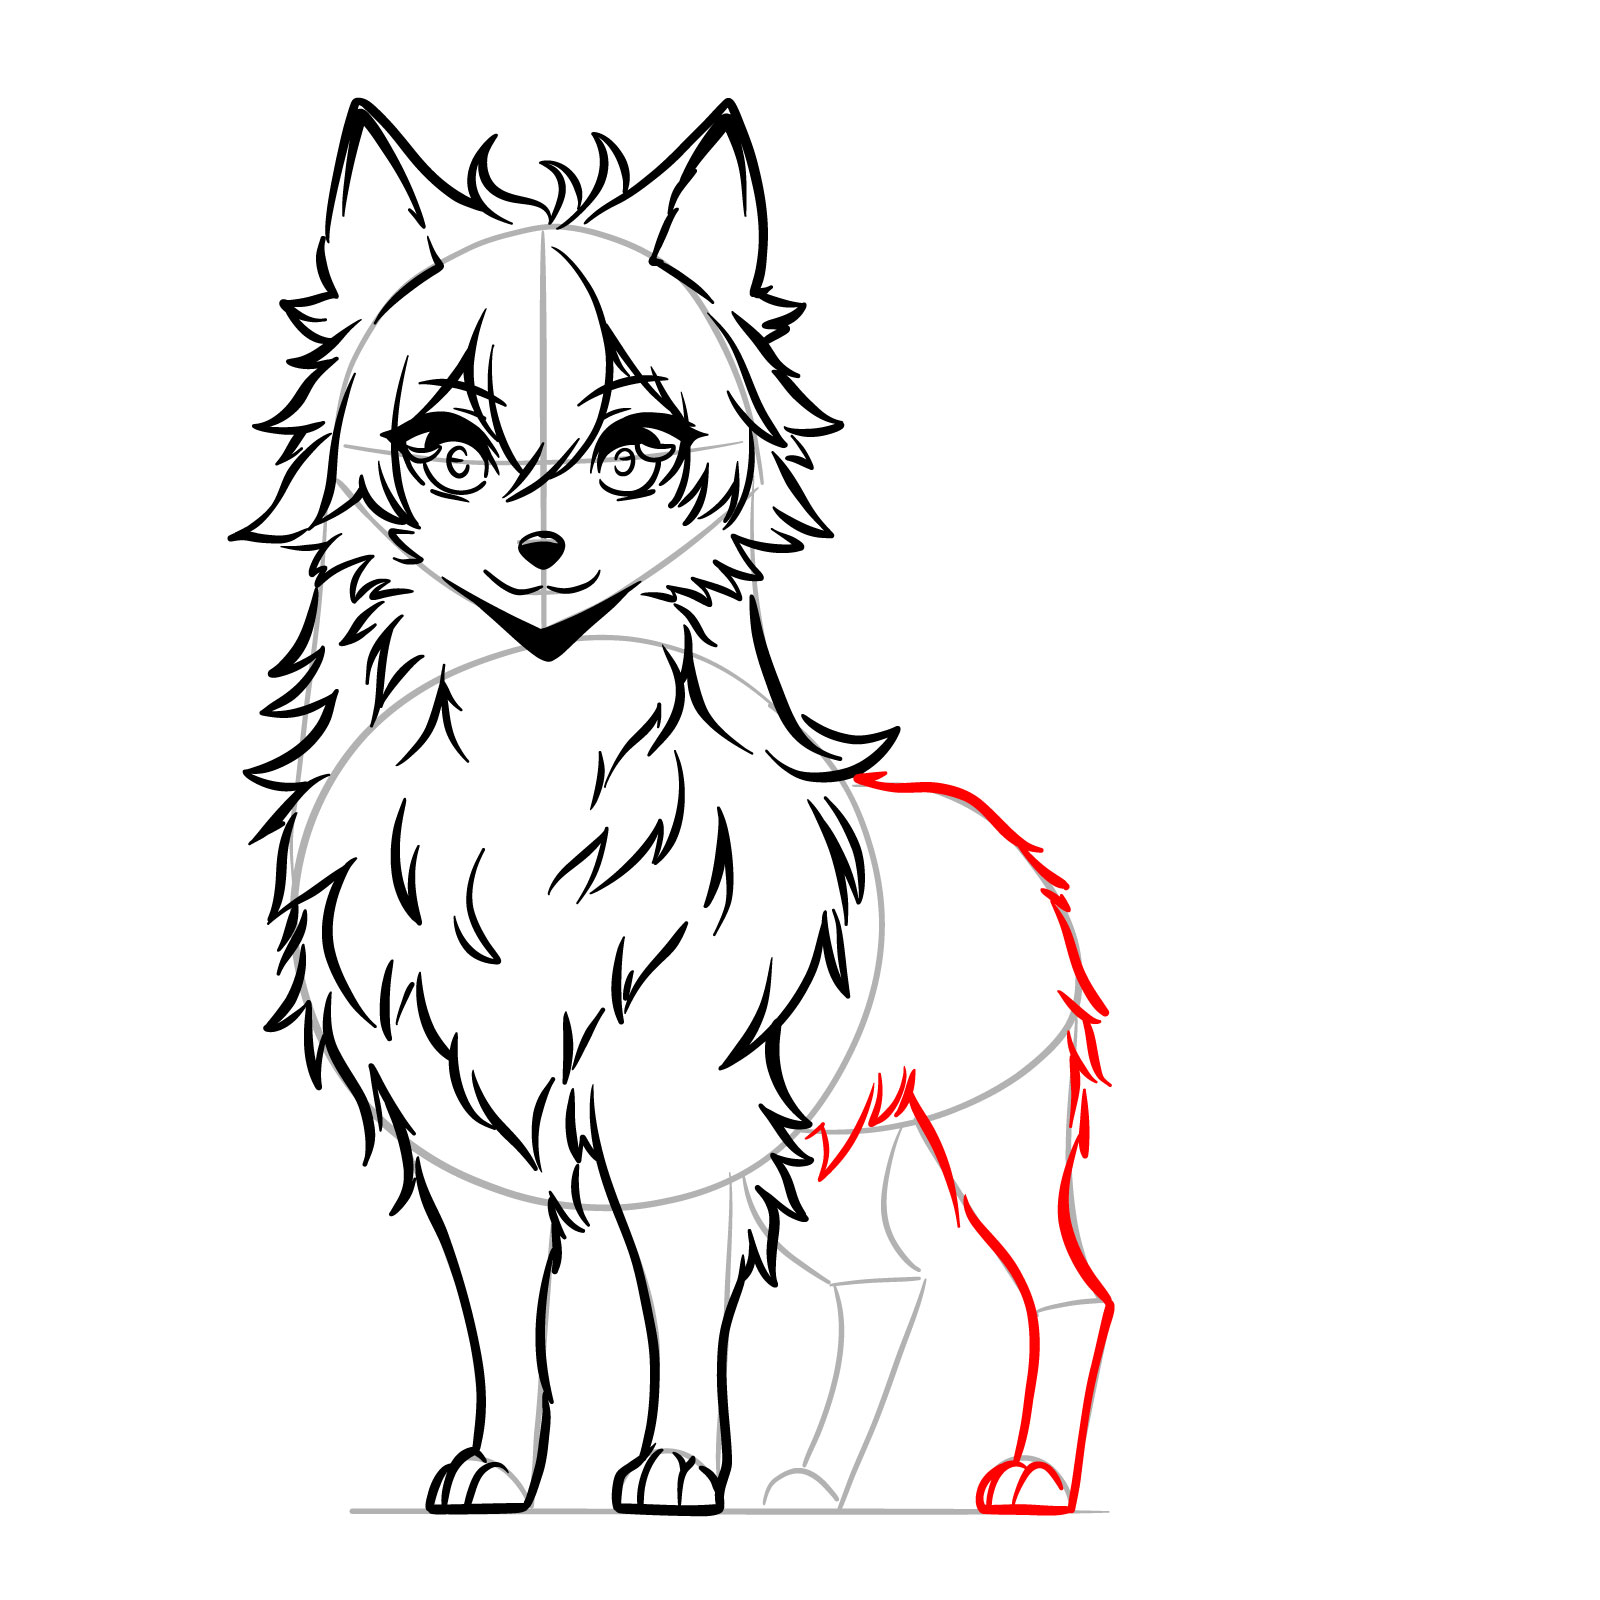 Anime wolf drawing progress with body and rear leg outlines - step 14